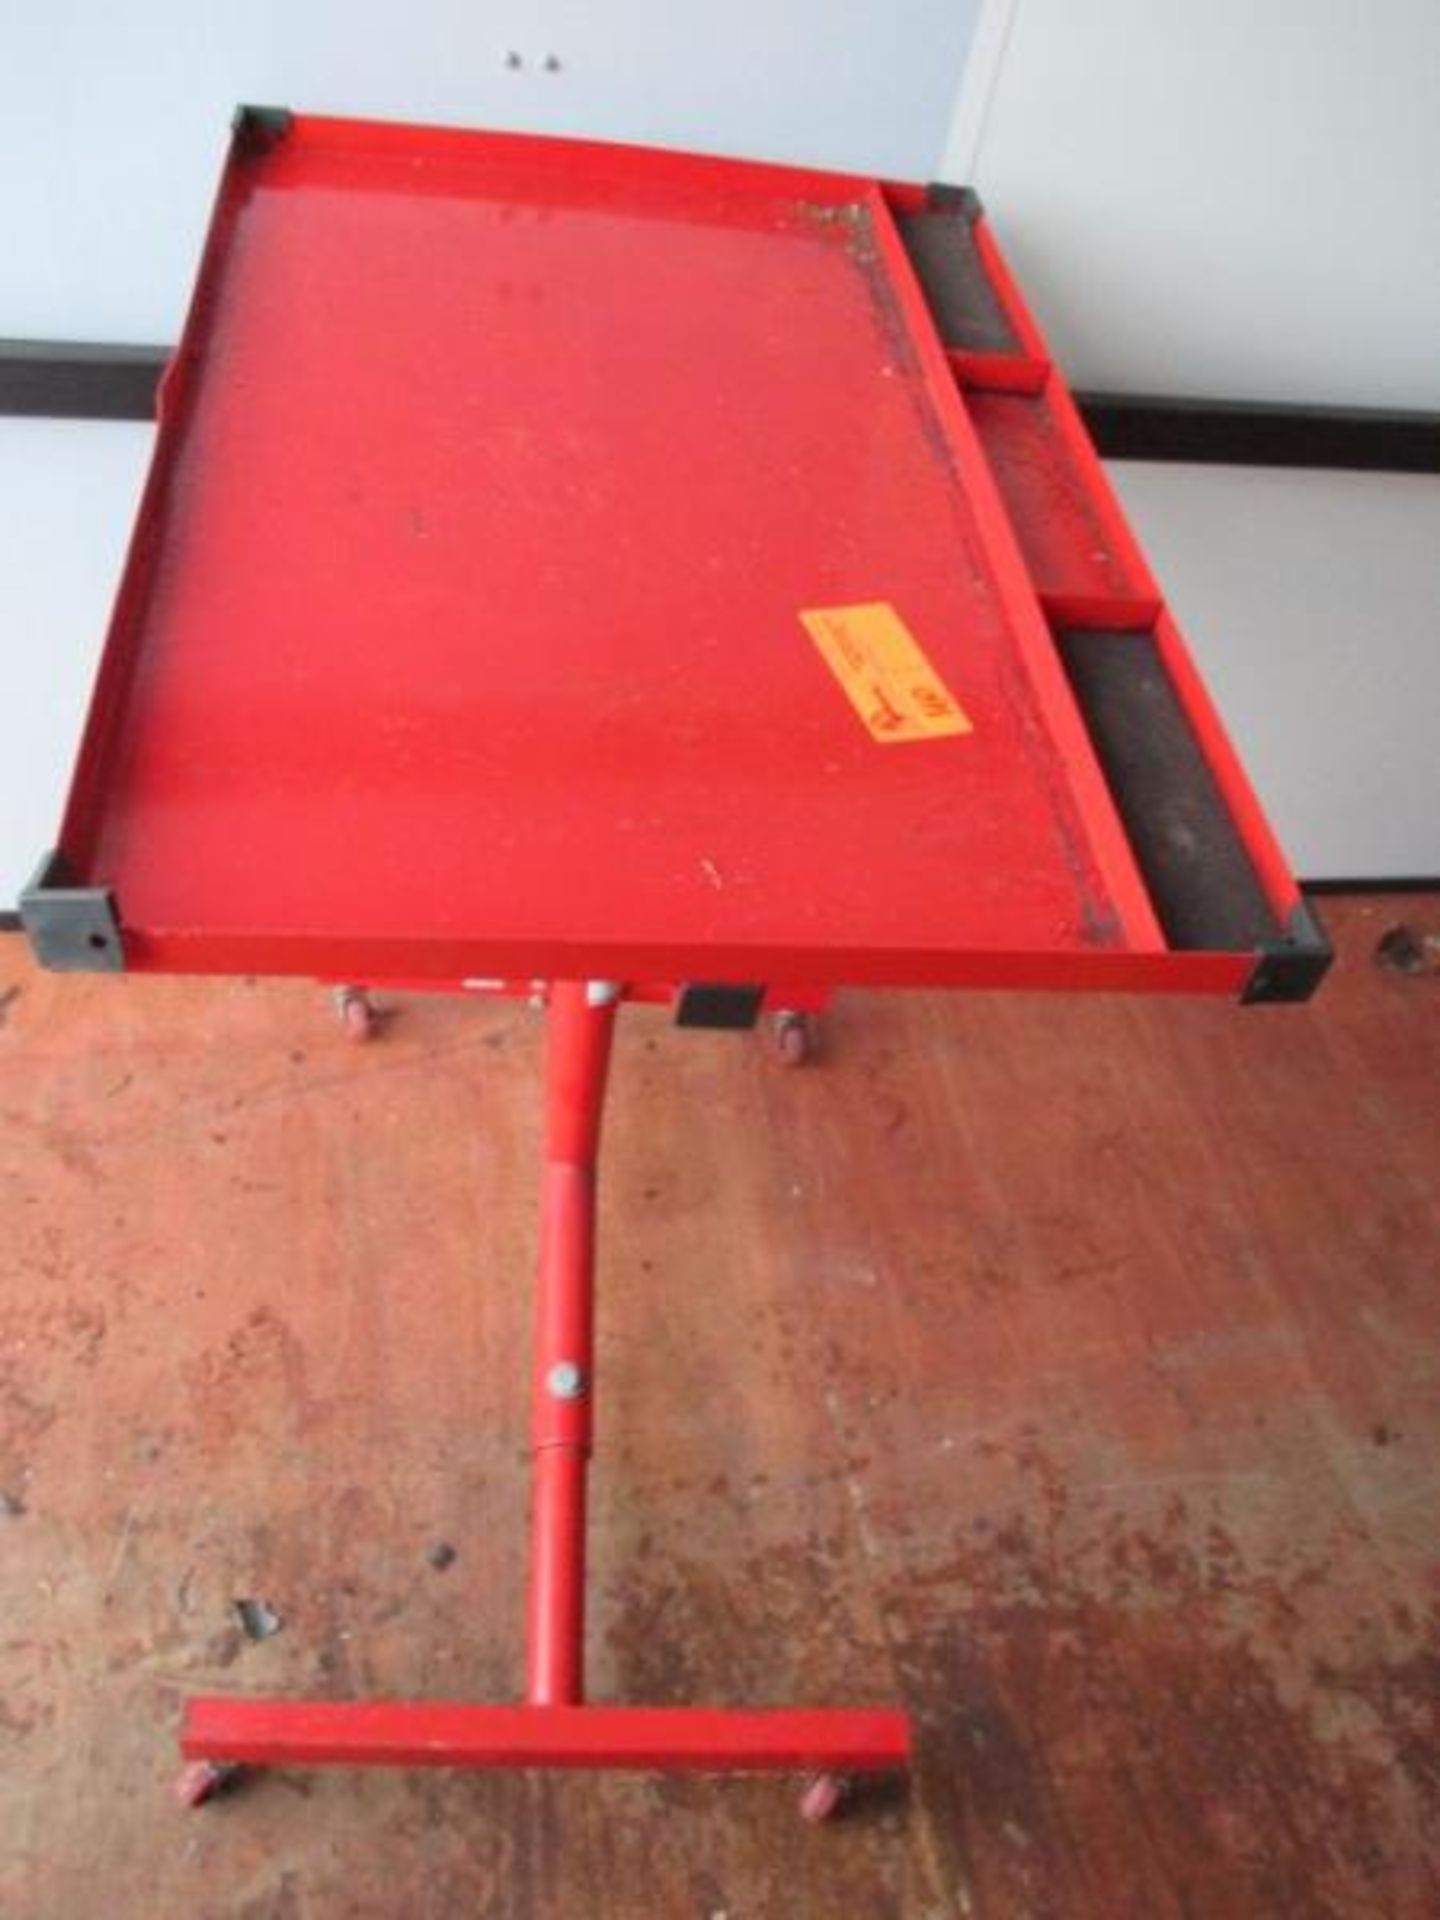 Pro Series Rolling Work Station, By Torin Big Red Jacks, Ite #T35304, Red Metal Jacks, Ite # - Image 3 of 4